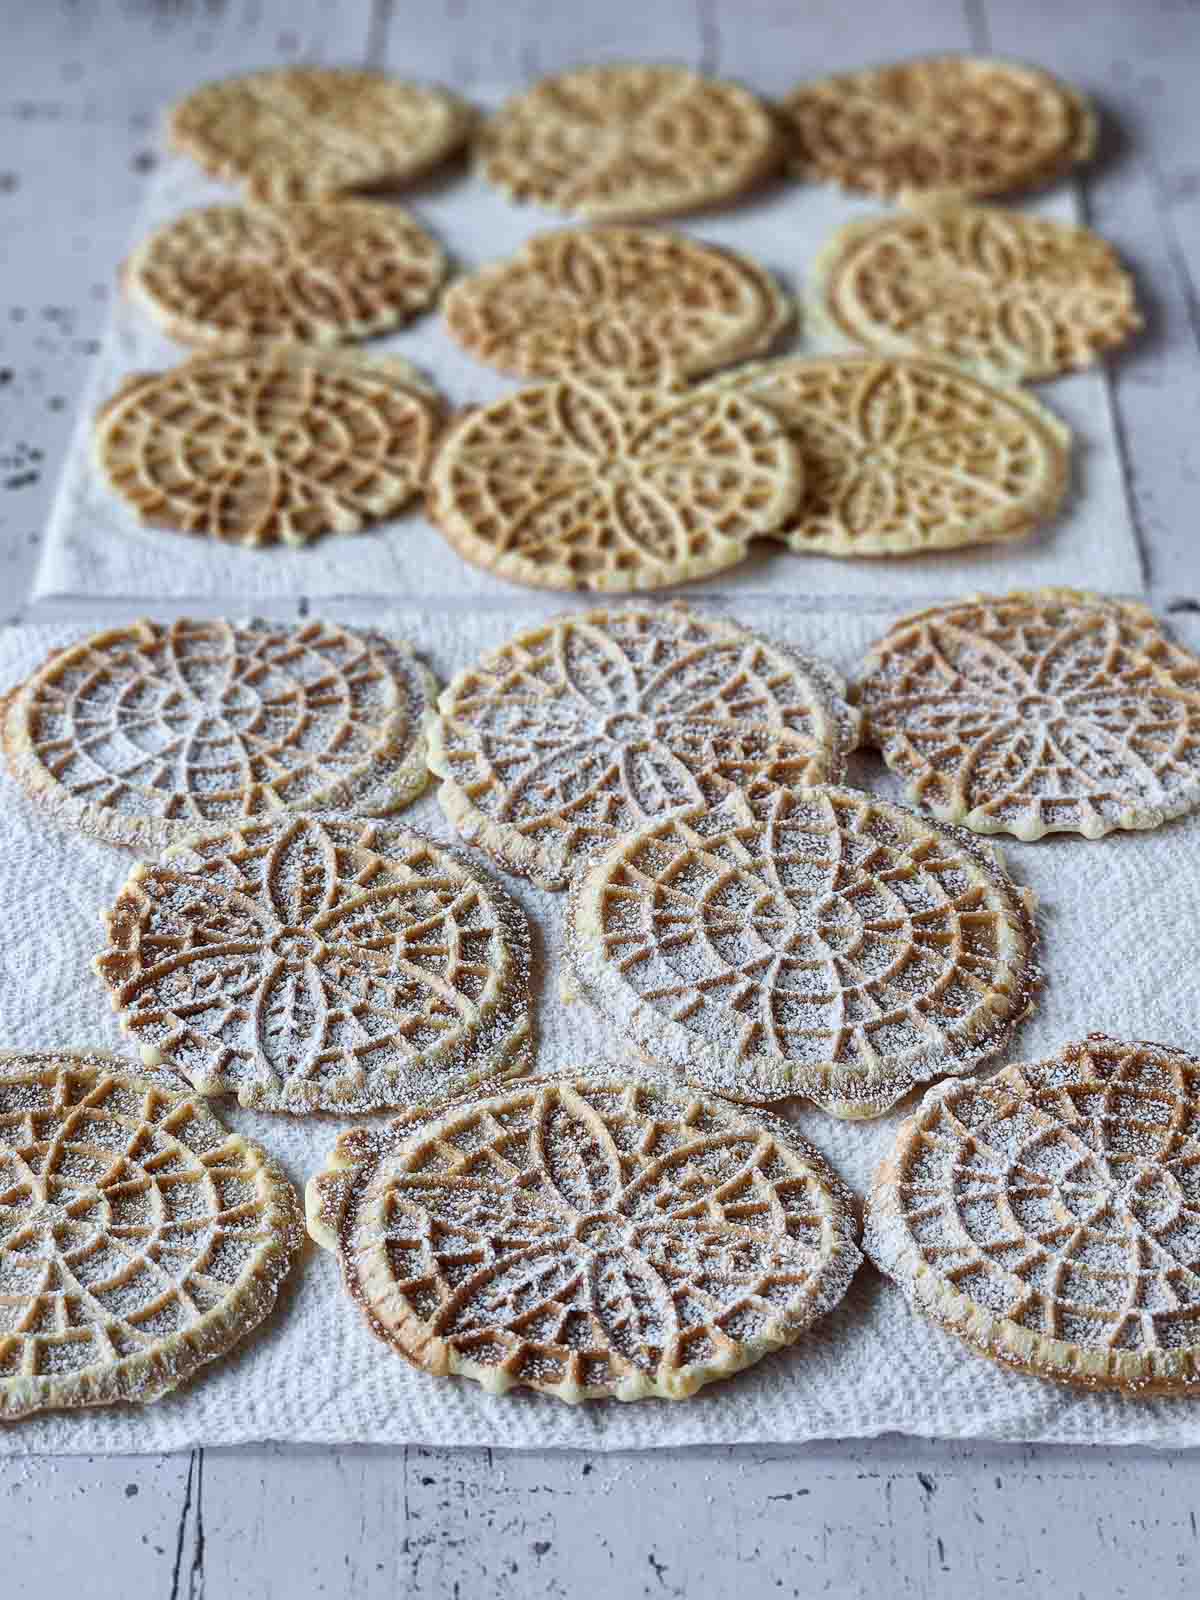 Cooked lemon pizzelles on paper towels with powdered sugar on them.